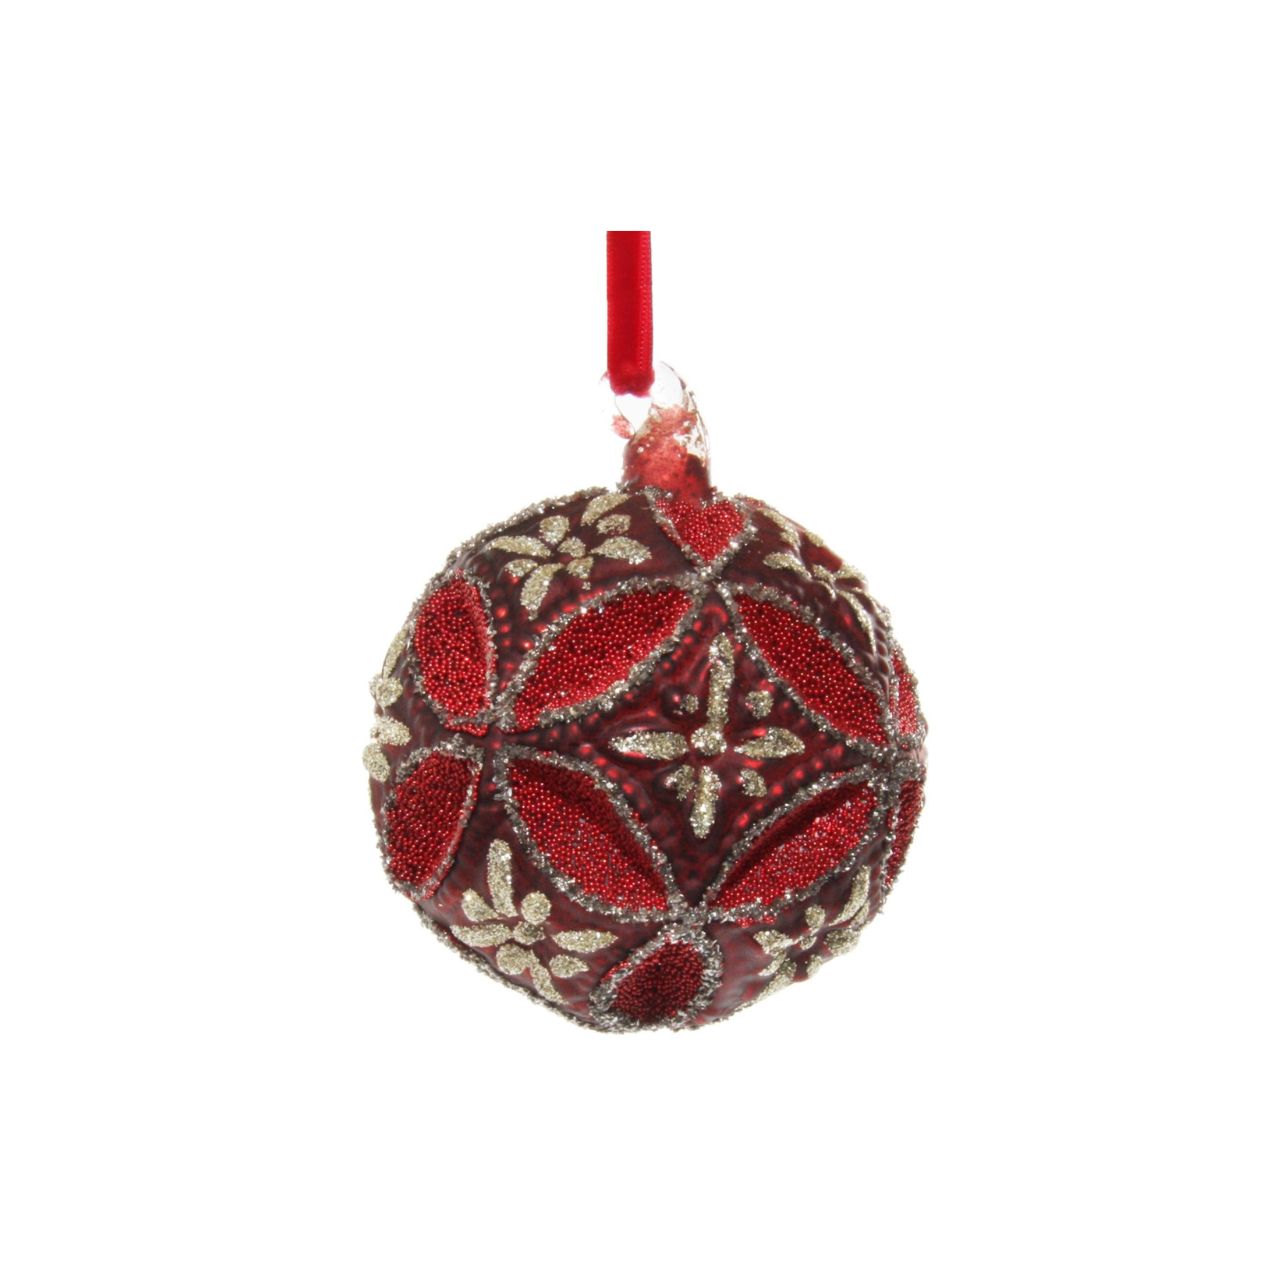 Shishi Burgundy Glass Floral Jewel Ball with Silver Glitter - Set of 6  Browse our beautiful range of luxury festive Christmas tree decorations, baubles & ornaments for your tree this Christmas.